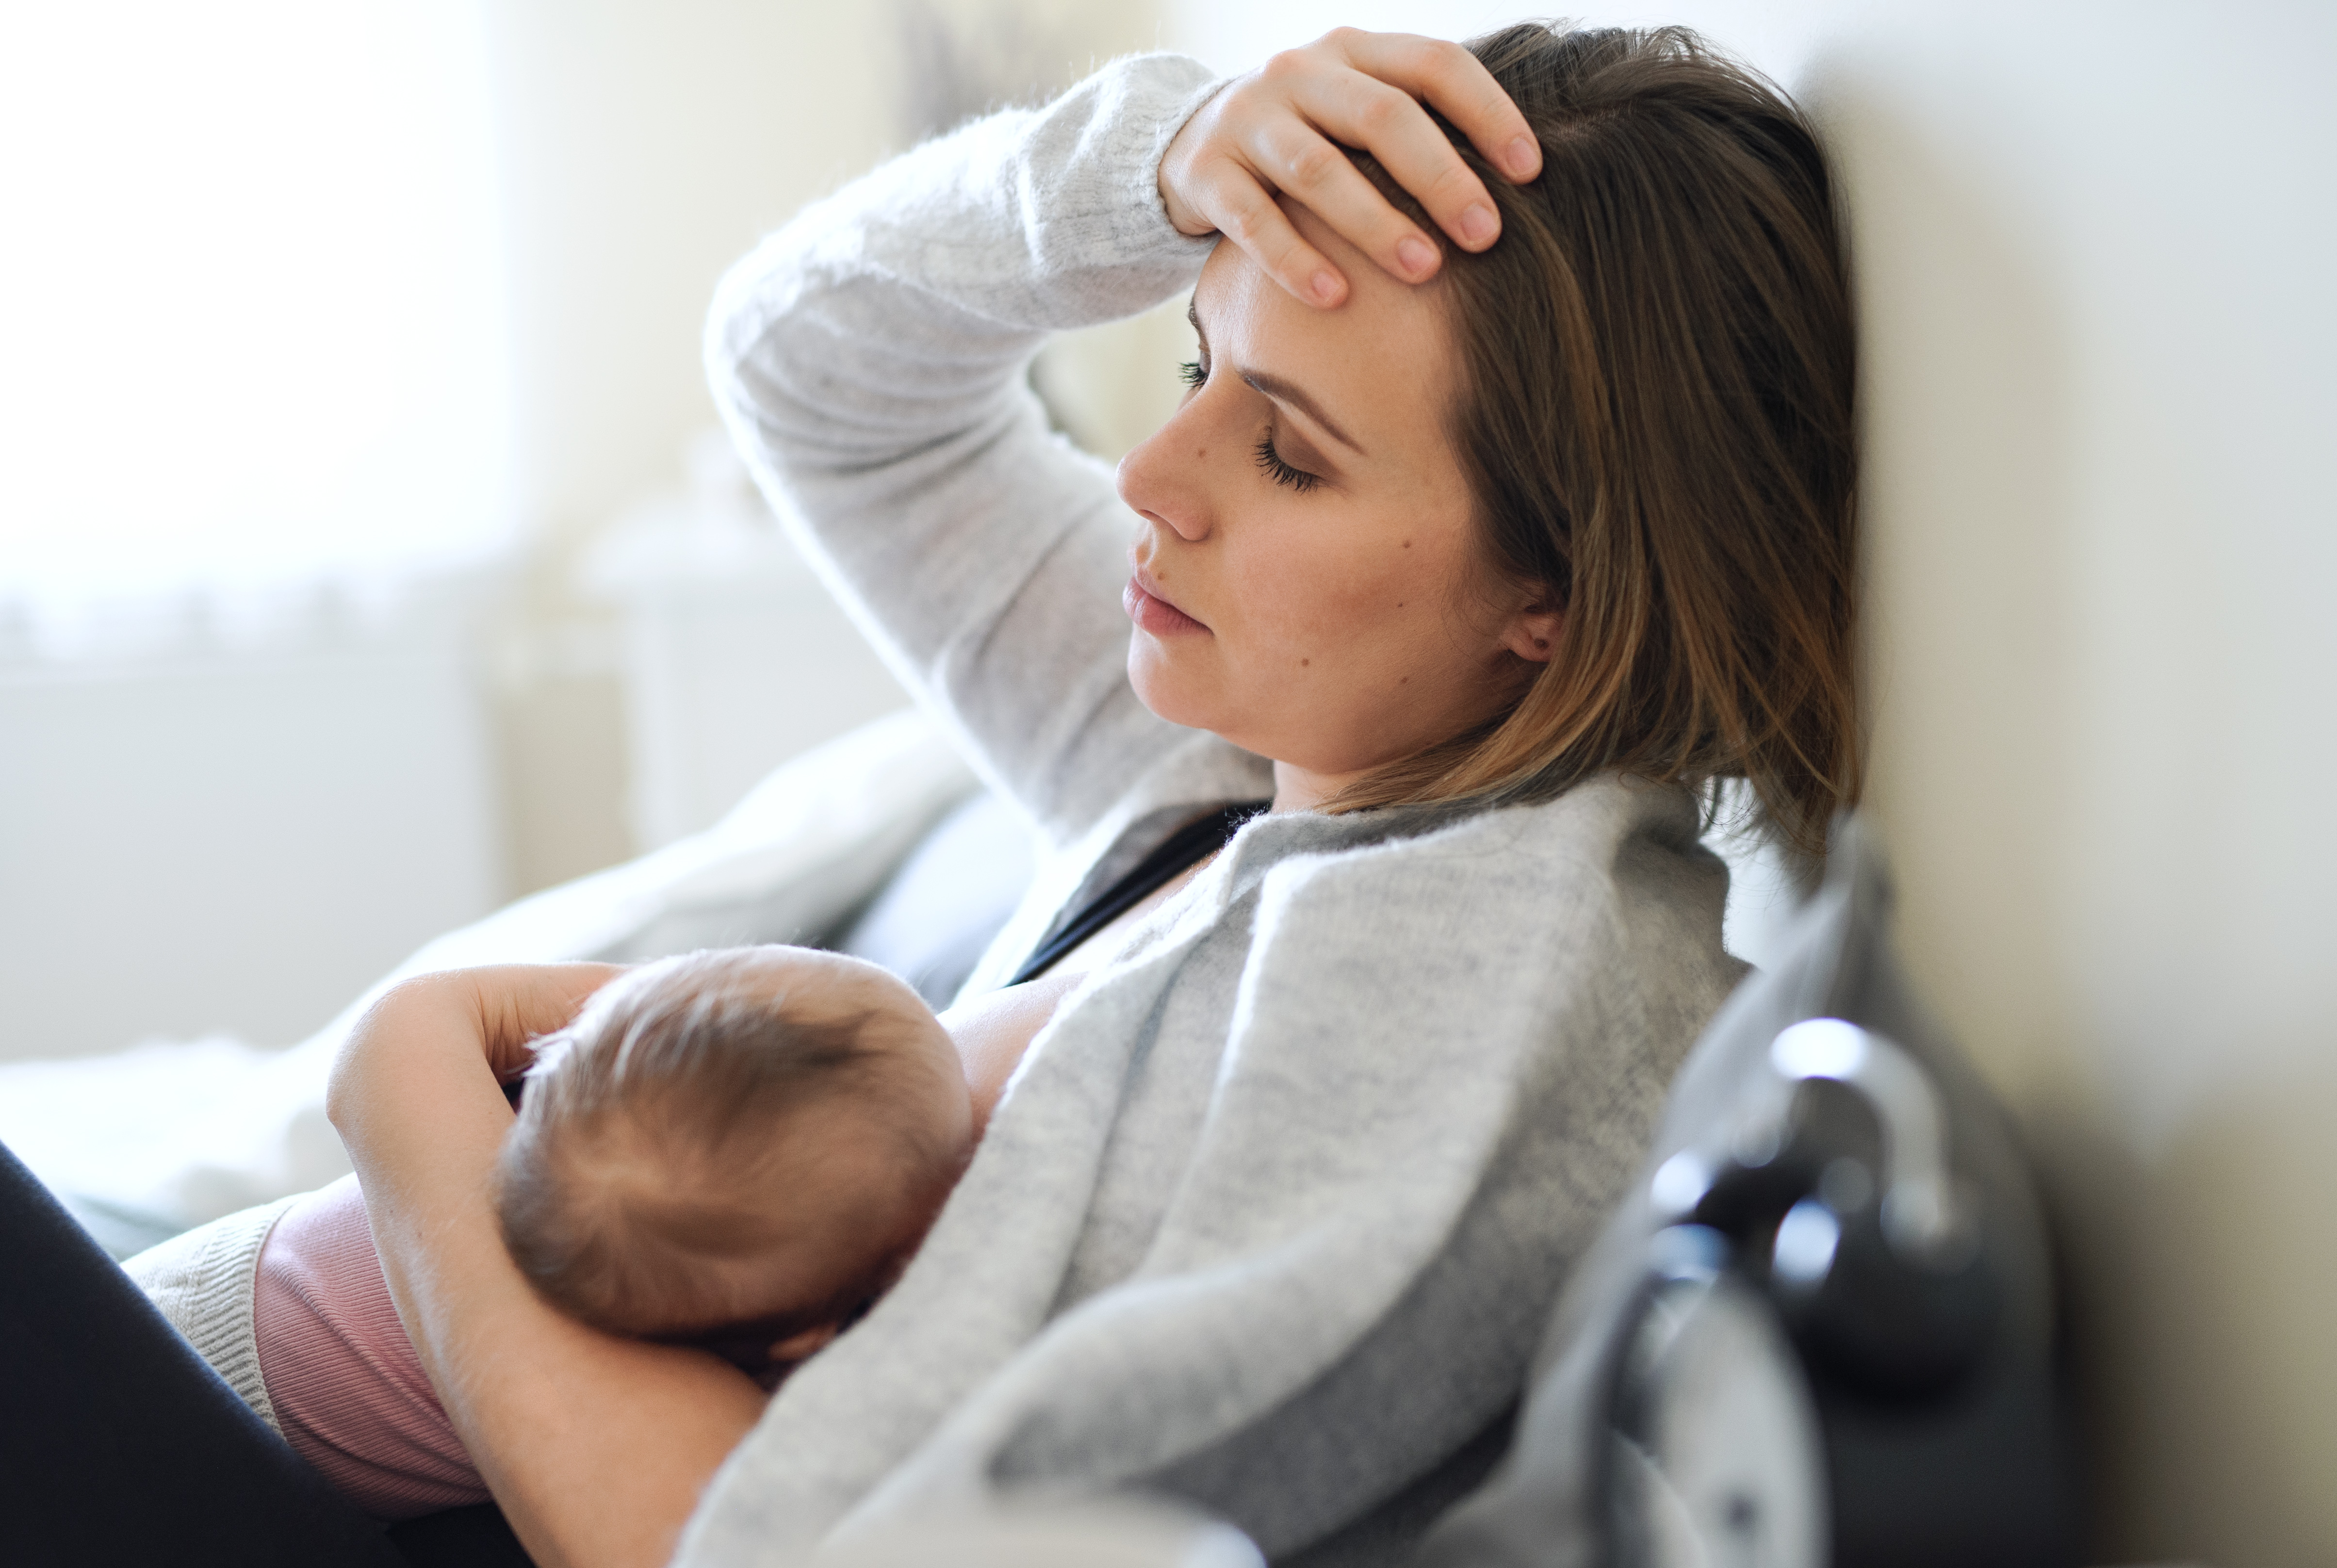 An exhausted woman holding a baby | Source: Getty Images